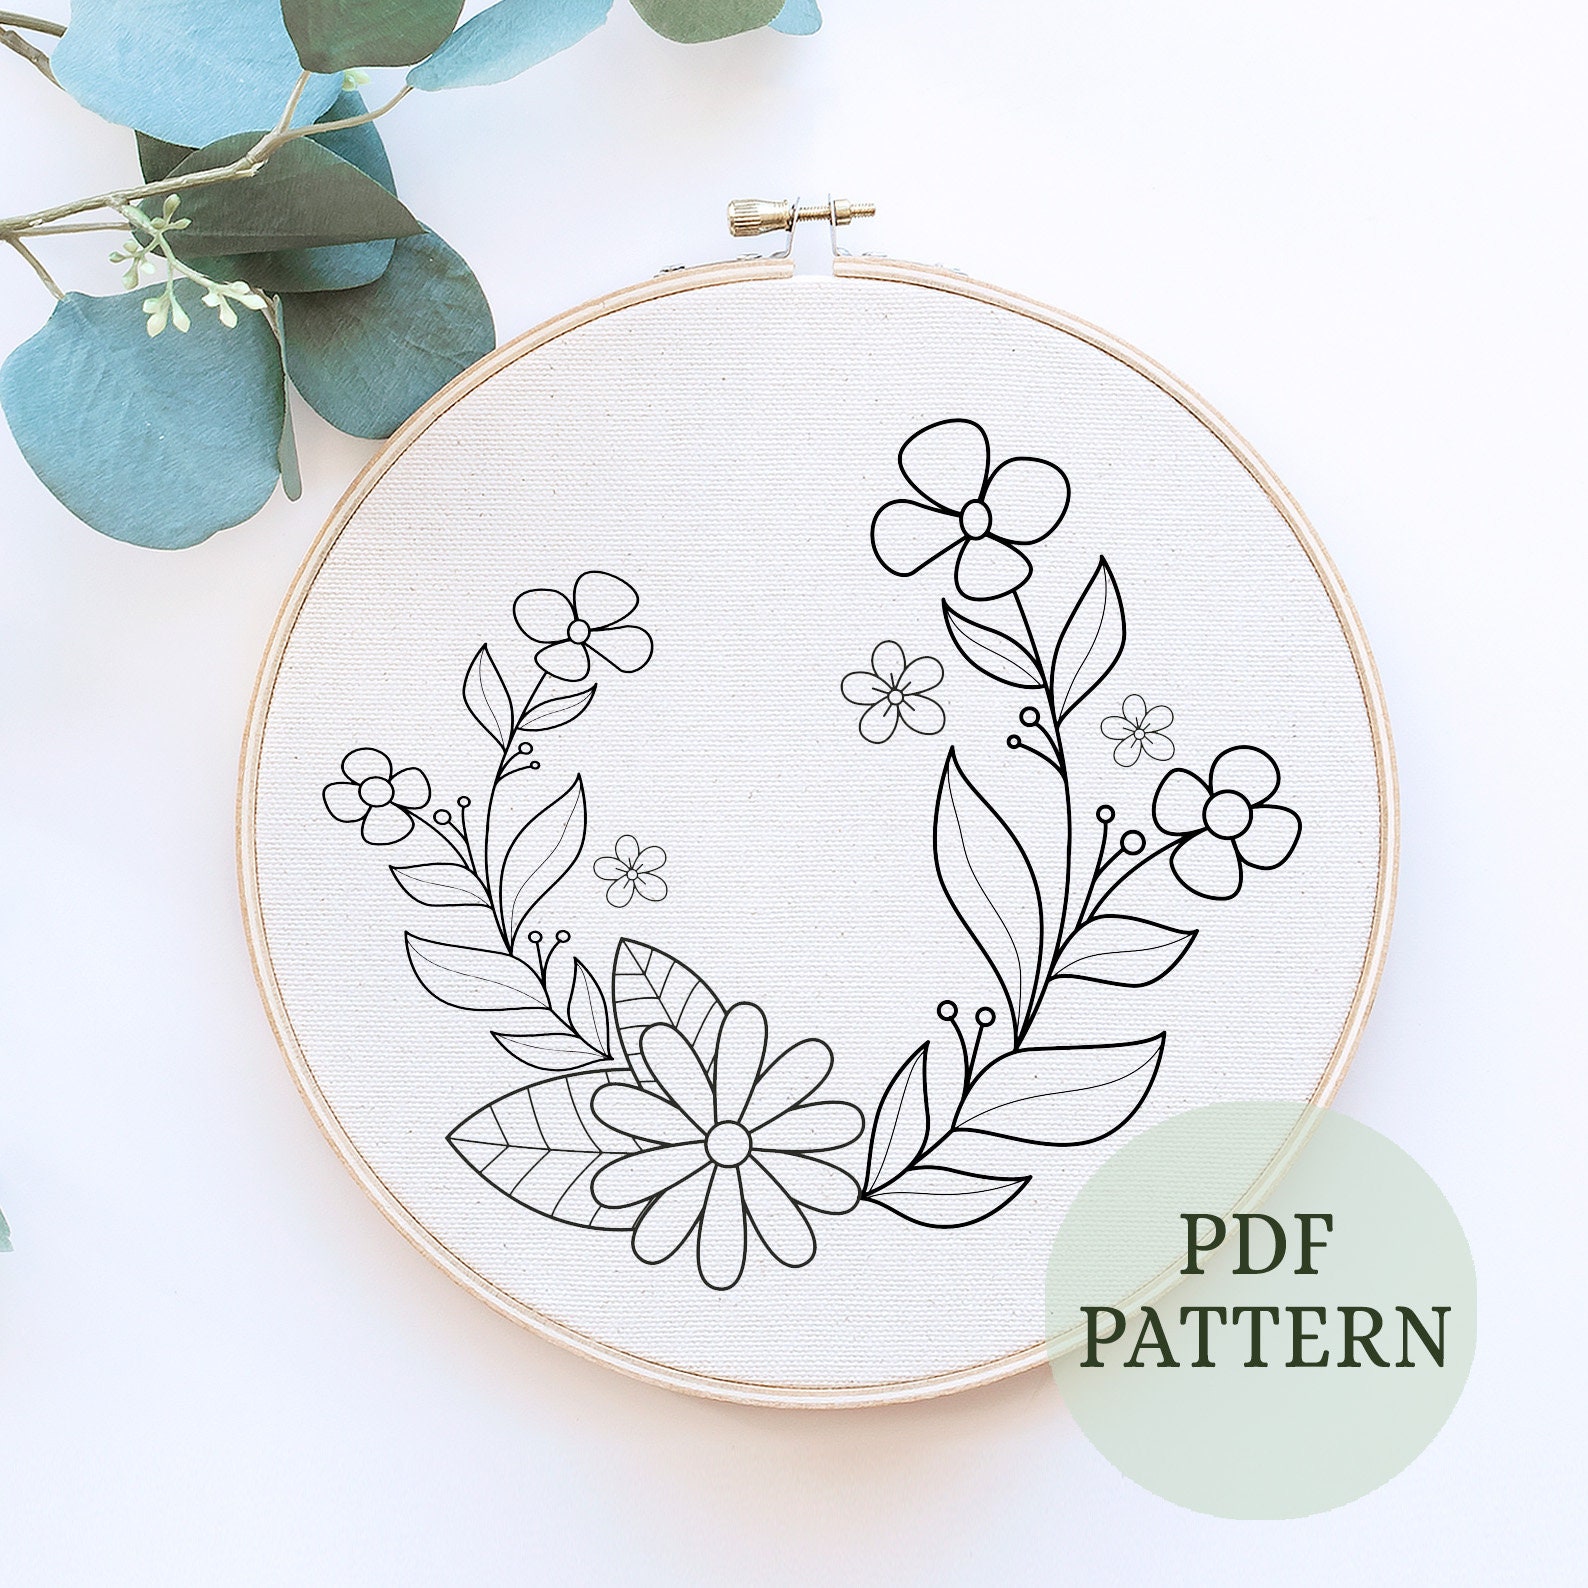 Easy Embroidery Pattern, Beginner Embroidery, Lavender Flowers, Instant  Download PDF, Baby Girl Nursery Decor 